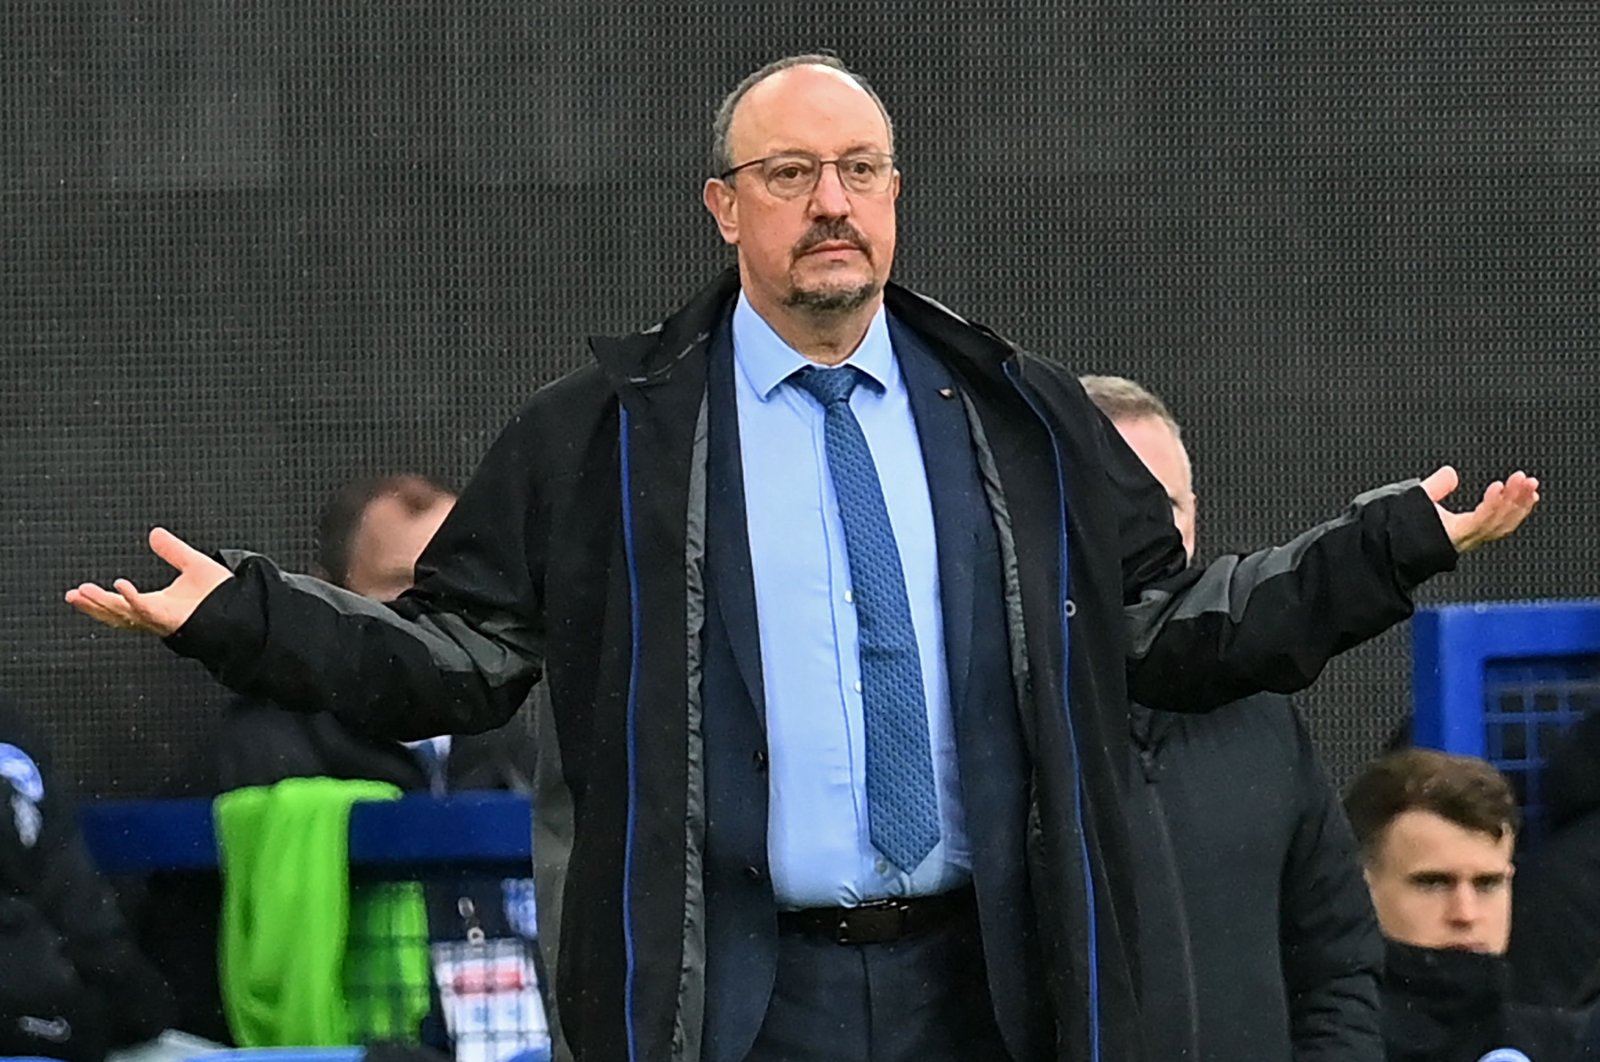 Everton manager Rafael Benitez gestures during a Premier League match against Brighton and Hove Albion, Liverpool, England, Jan. 2, 2022. (AFP Photo)